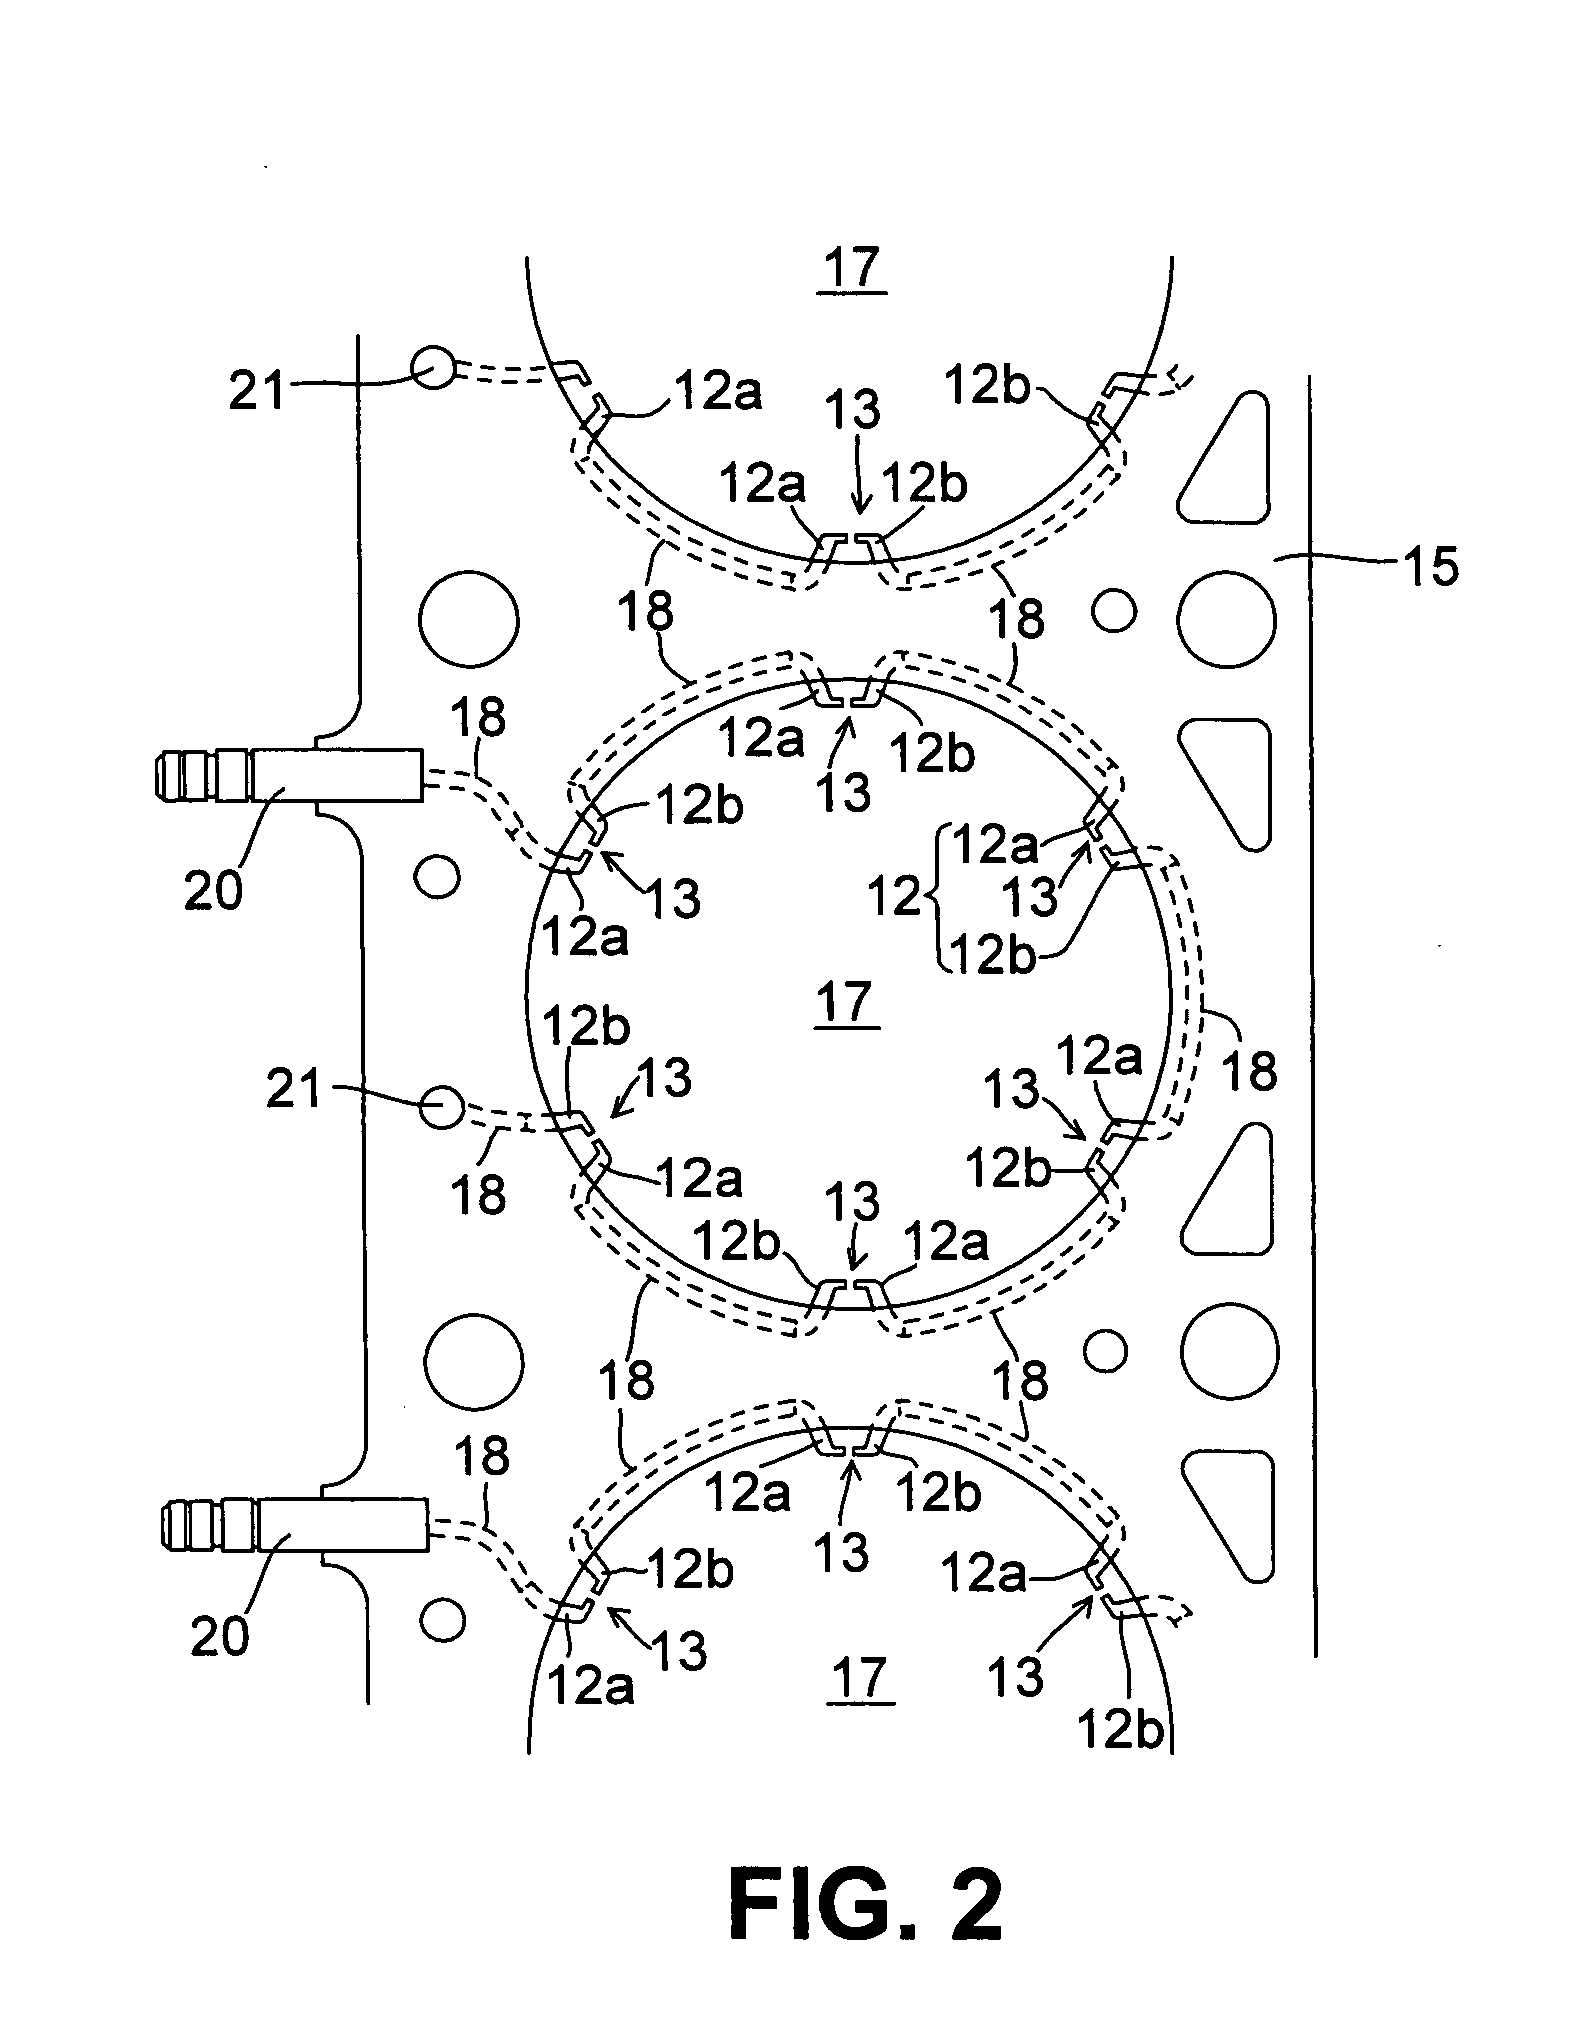 Multipoint ignition engine